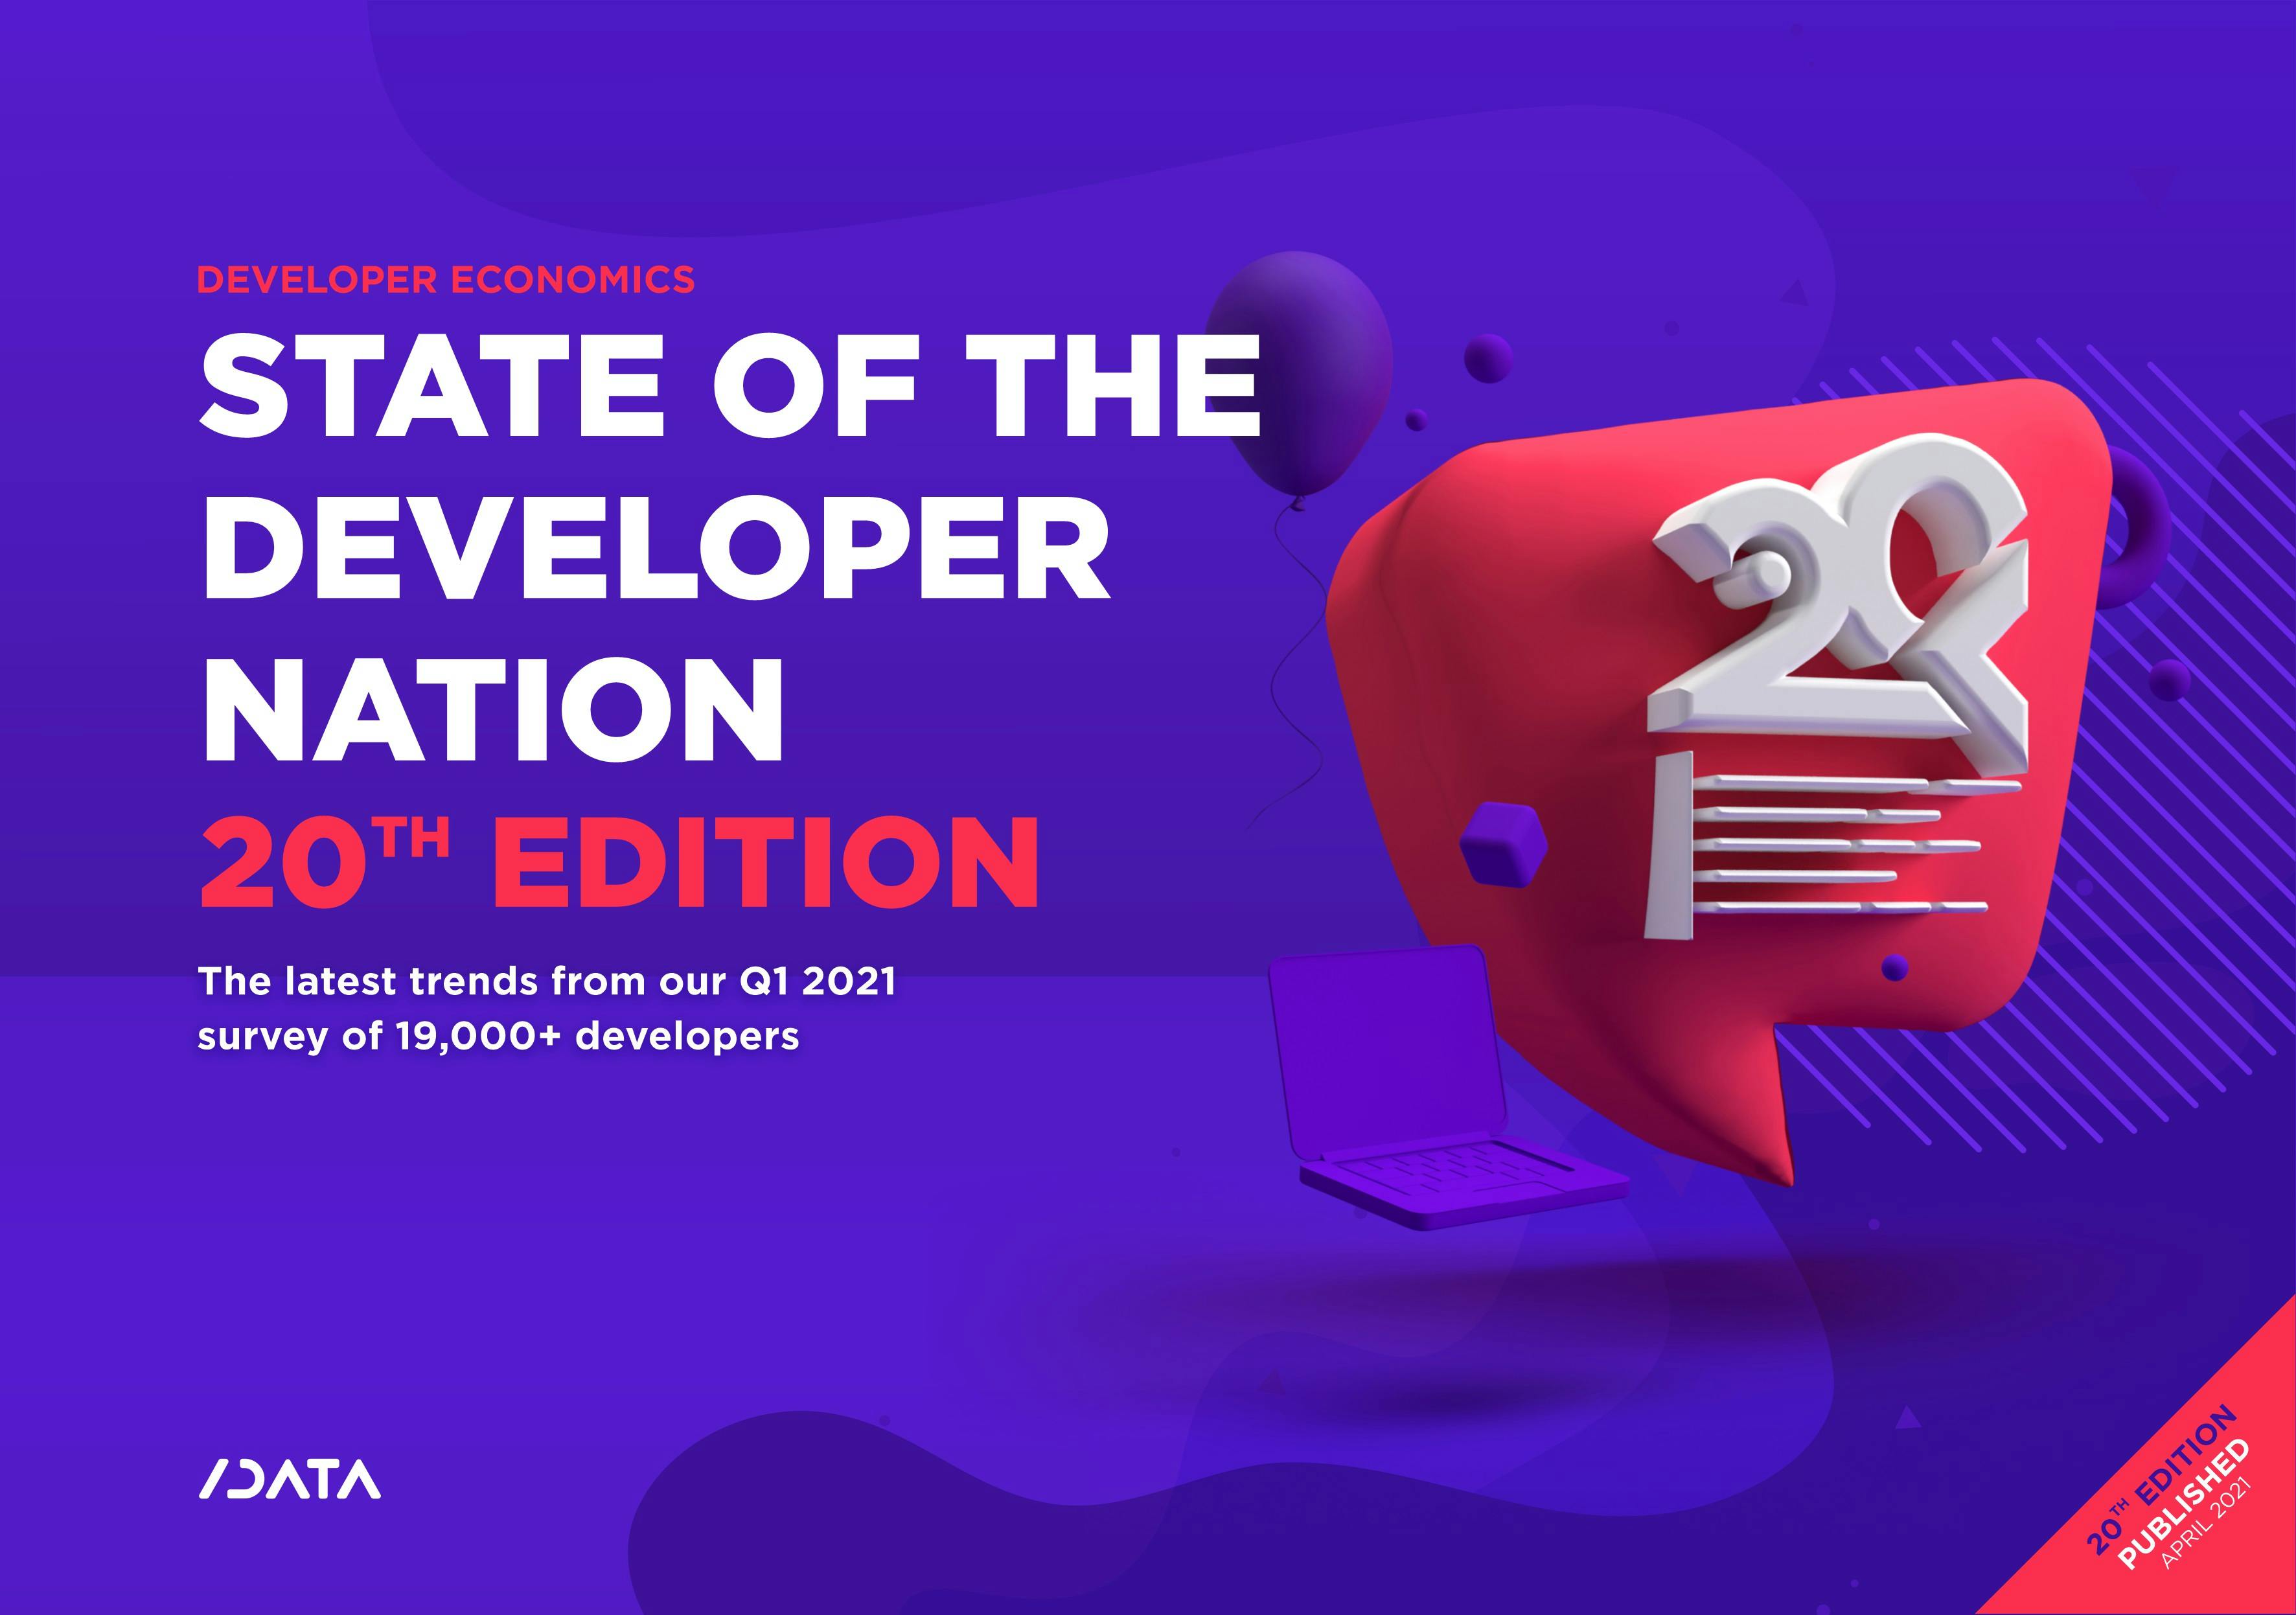 State of the Developer Nation 20th Edition - Q1 2021